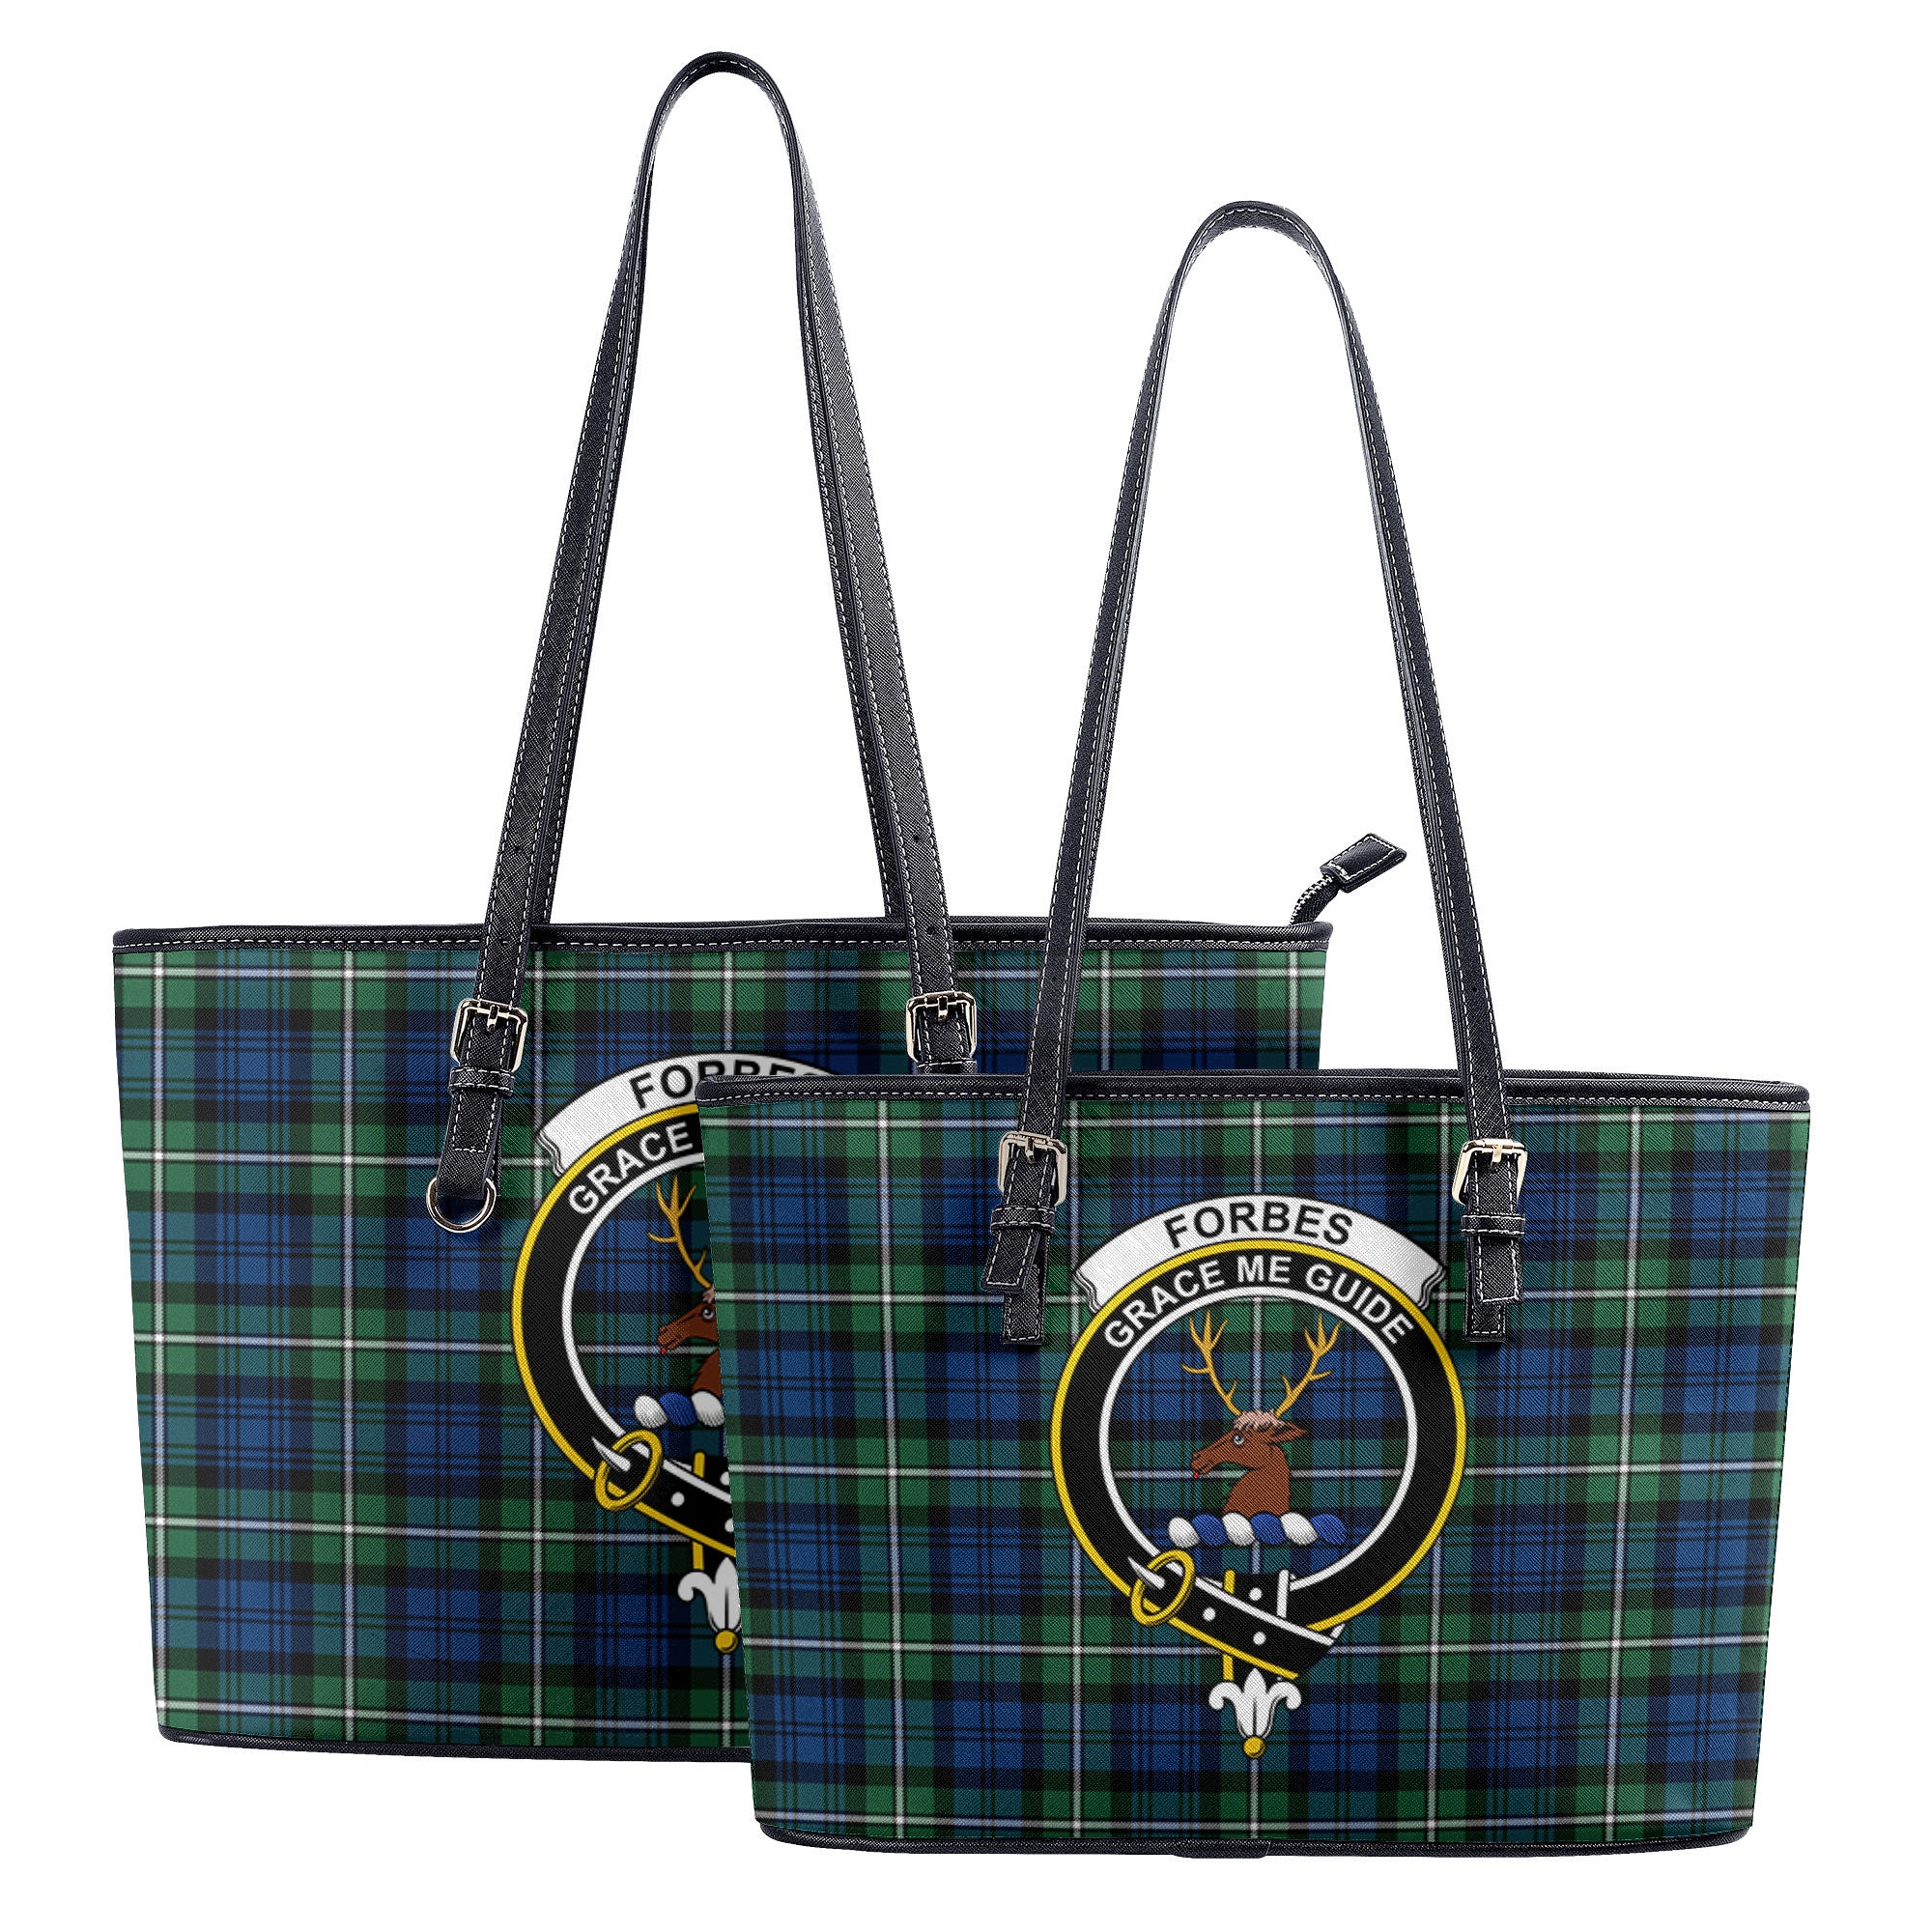 Forbes Ancient Tartan Crest Leather Tote Bag